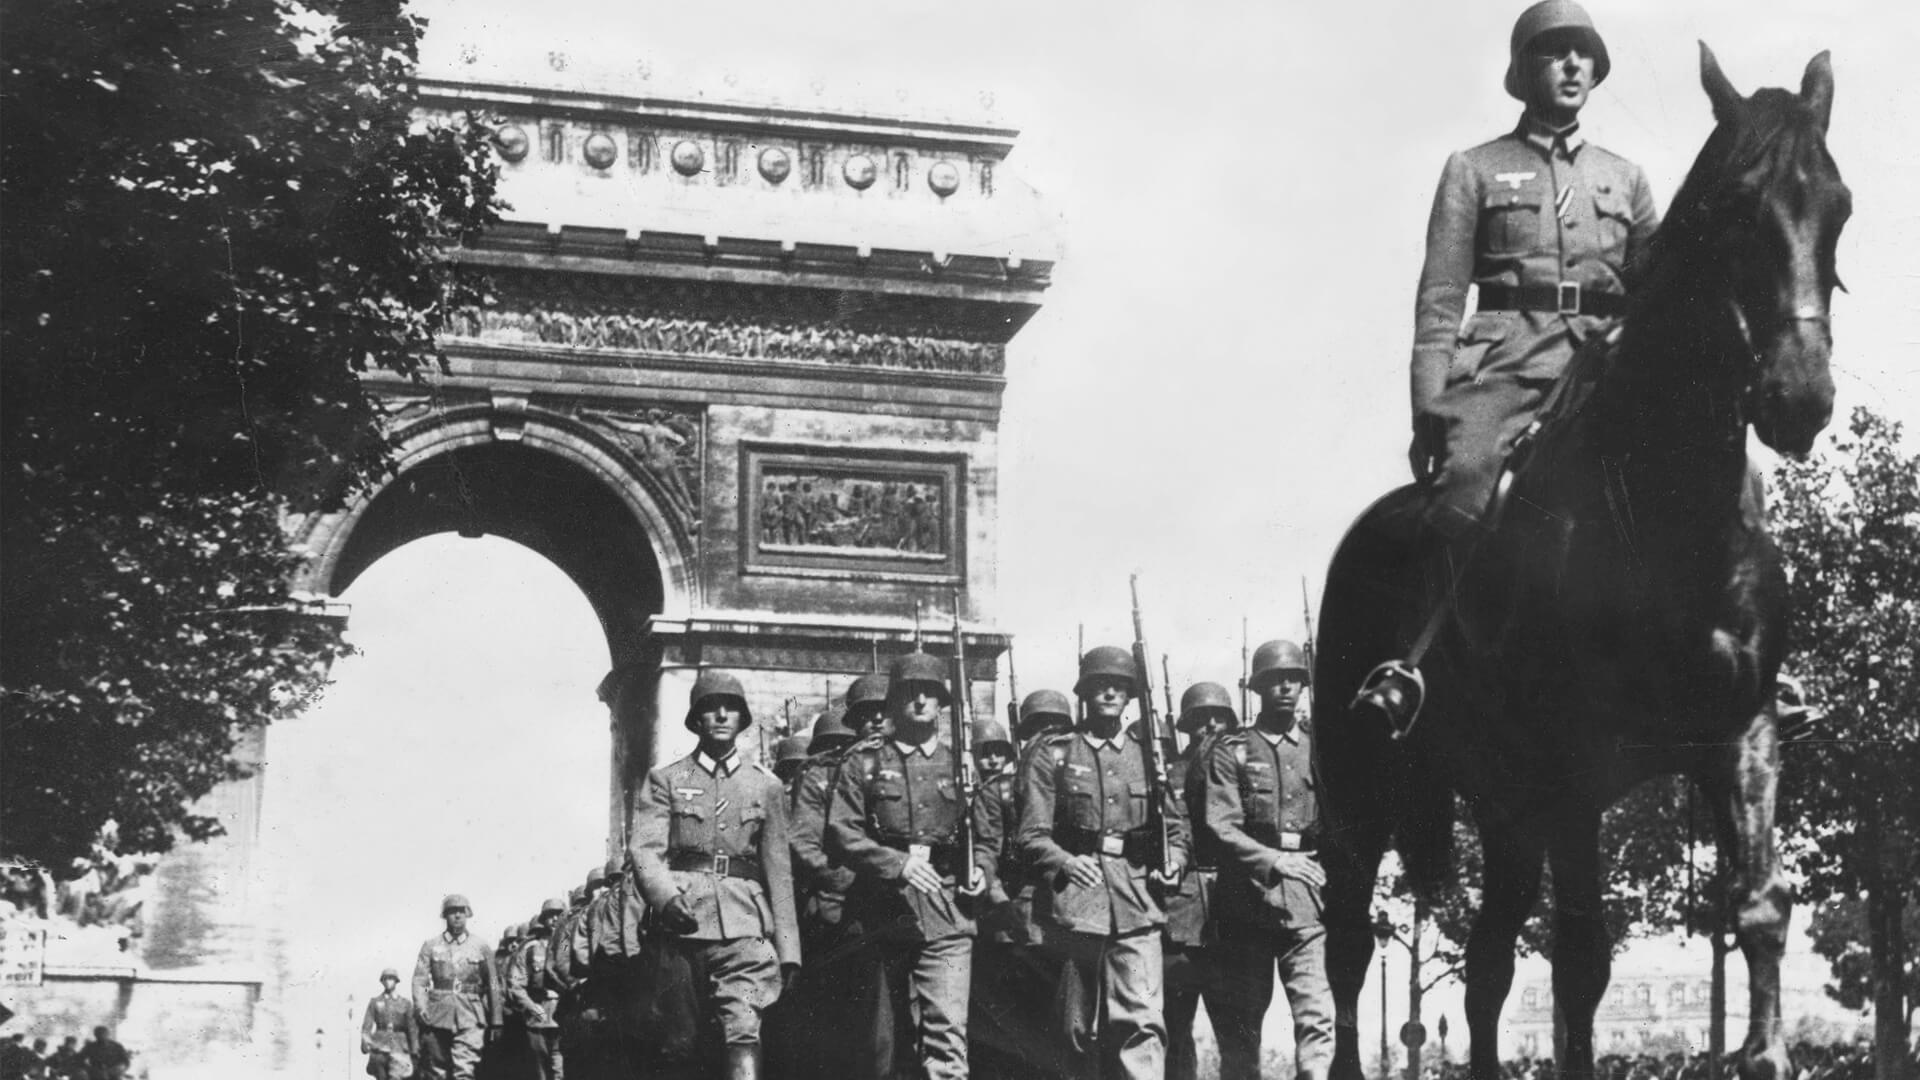 German troops march through the Champs Elysees, Paris, France